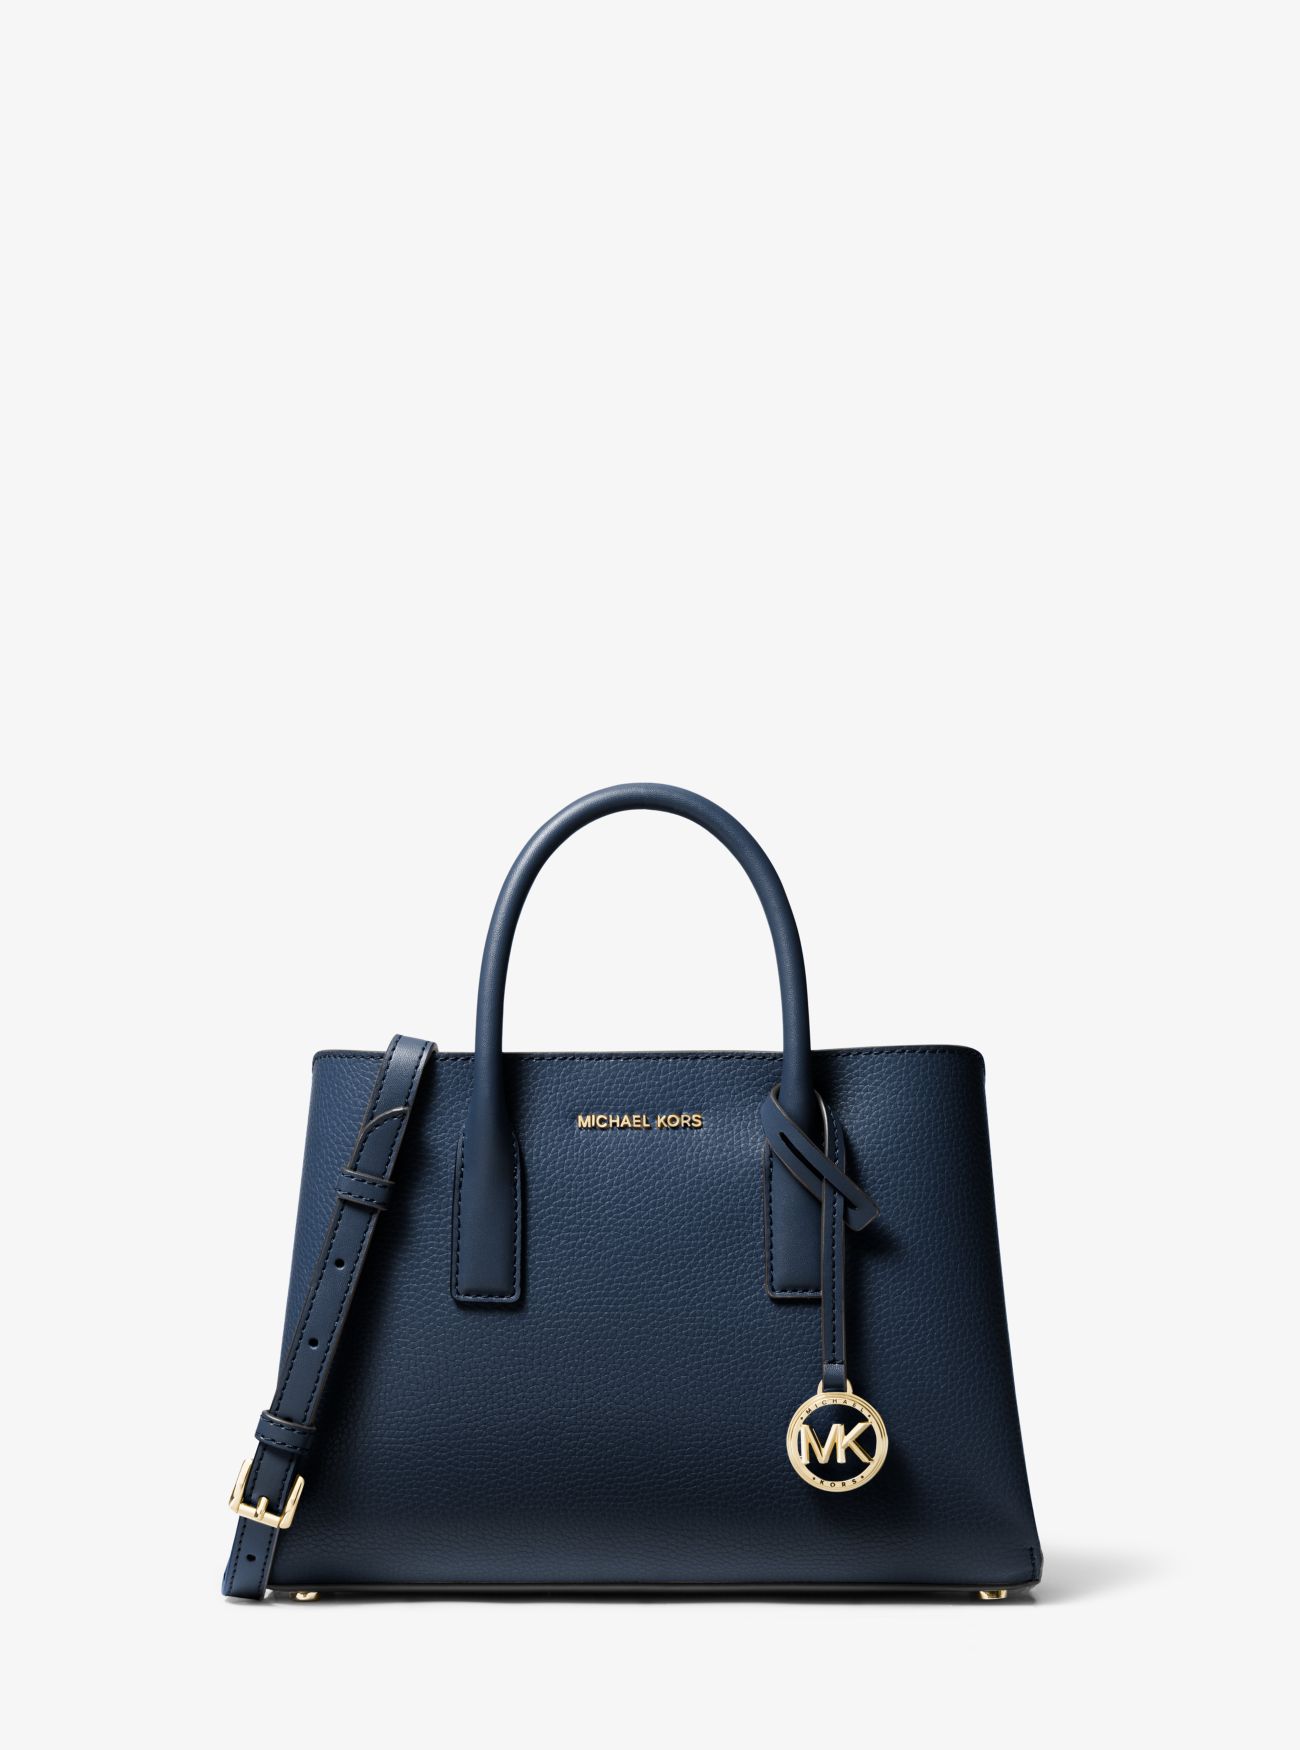 MK Ruthie Small Pebbled Leather Satchel - Navy - Michael Kors